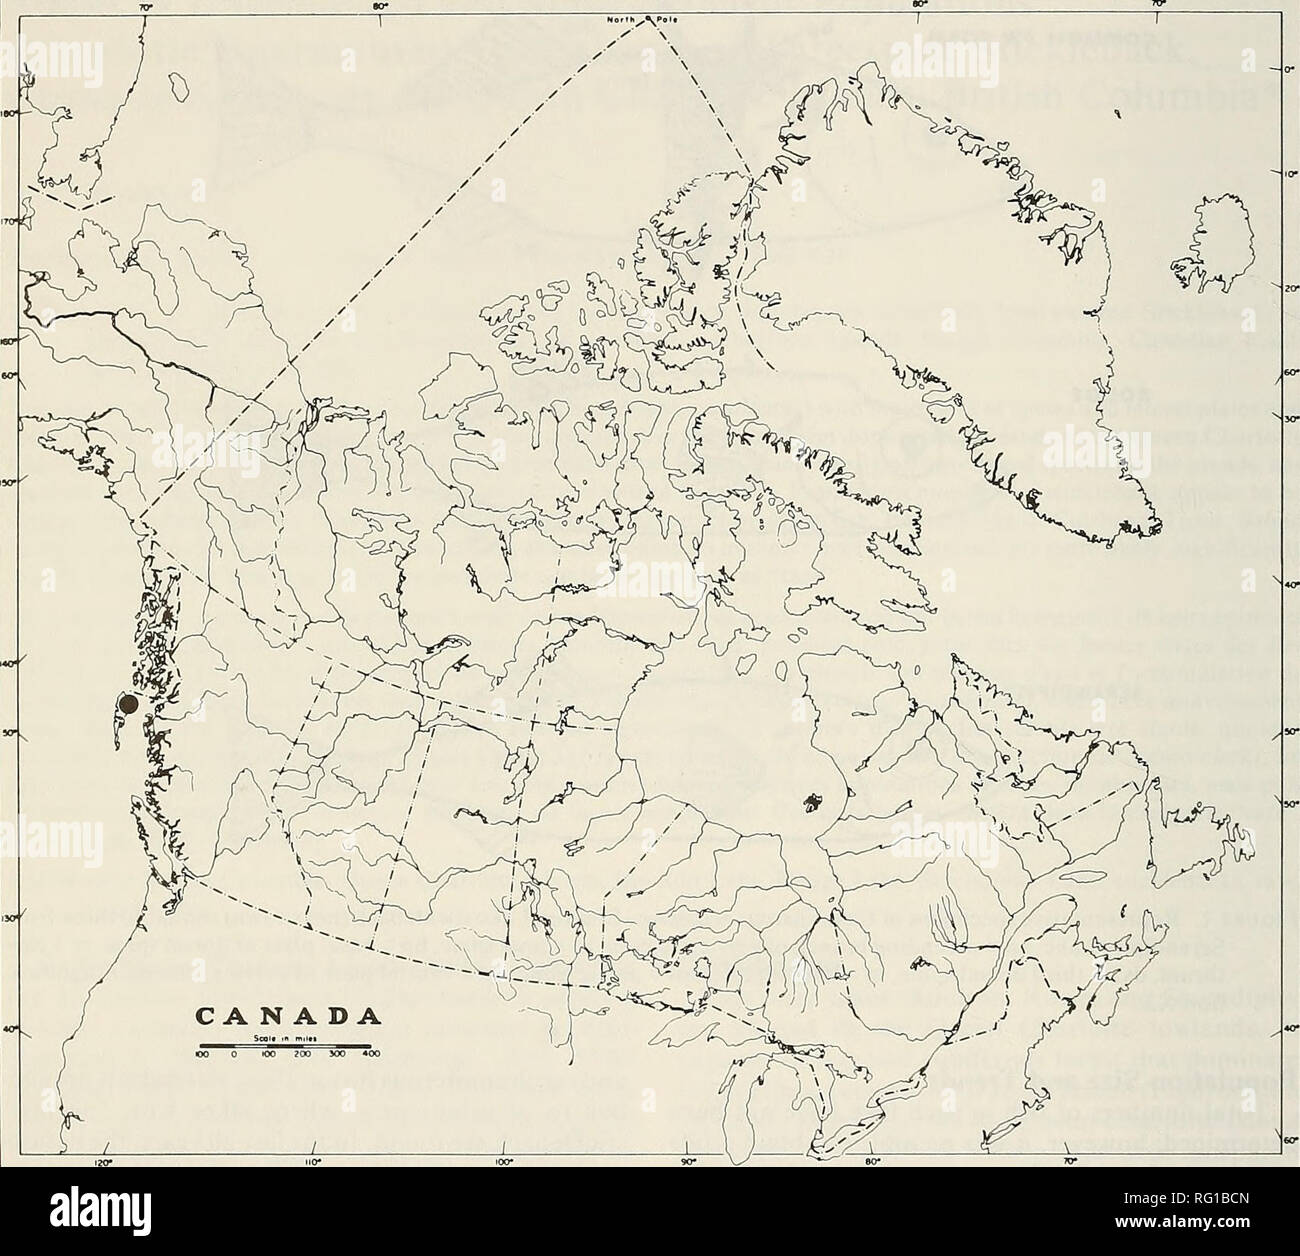 . The Canadian field-naturalist. 122 The Canadian Field-Naturalist Vol. 98. Figure 2. Distribution of Unarmoured Stickleback (Gaslerosieus sp.) in Canada. Courtesy of D. E. McAllister National Museum of Natural Sciences. Habitat Trends Boulton Lake. There have been no significant changes in water levels or in the lake basin between 1970 (when the lake was first visited) and 1981. Rouge Lake. In 1970, when this lake was first sampled, the shoreline was characterized by broad sand beaches which extended to the edge of vertical Sphagnum banks. Breeding stickleback were observed throughout this sh Stock Photo